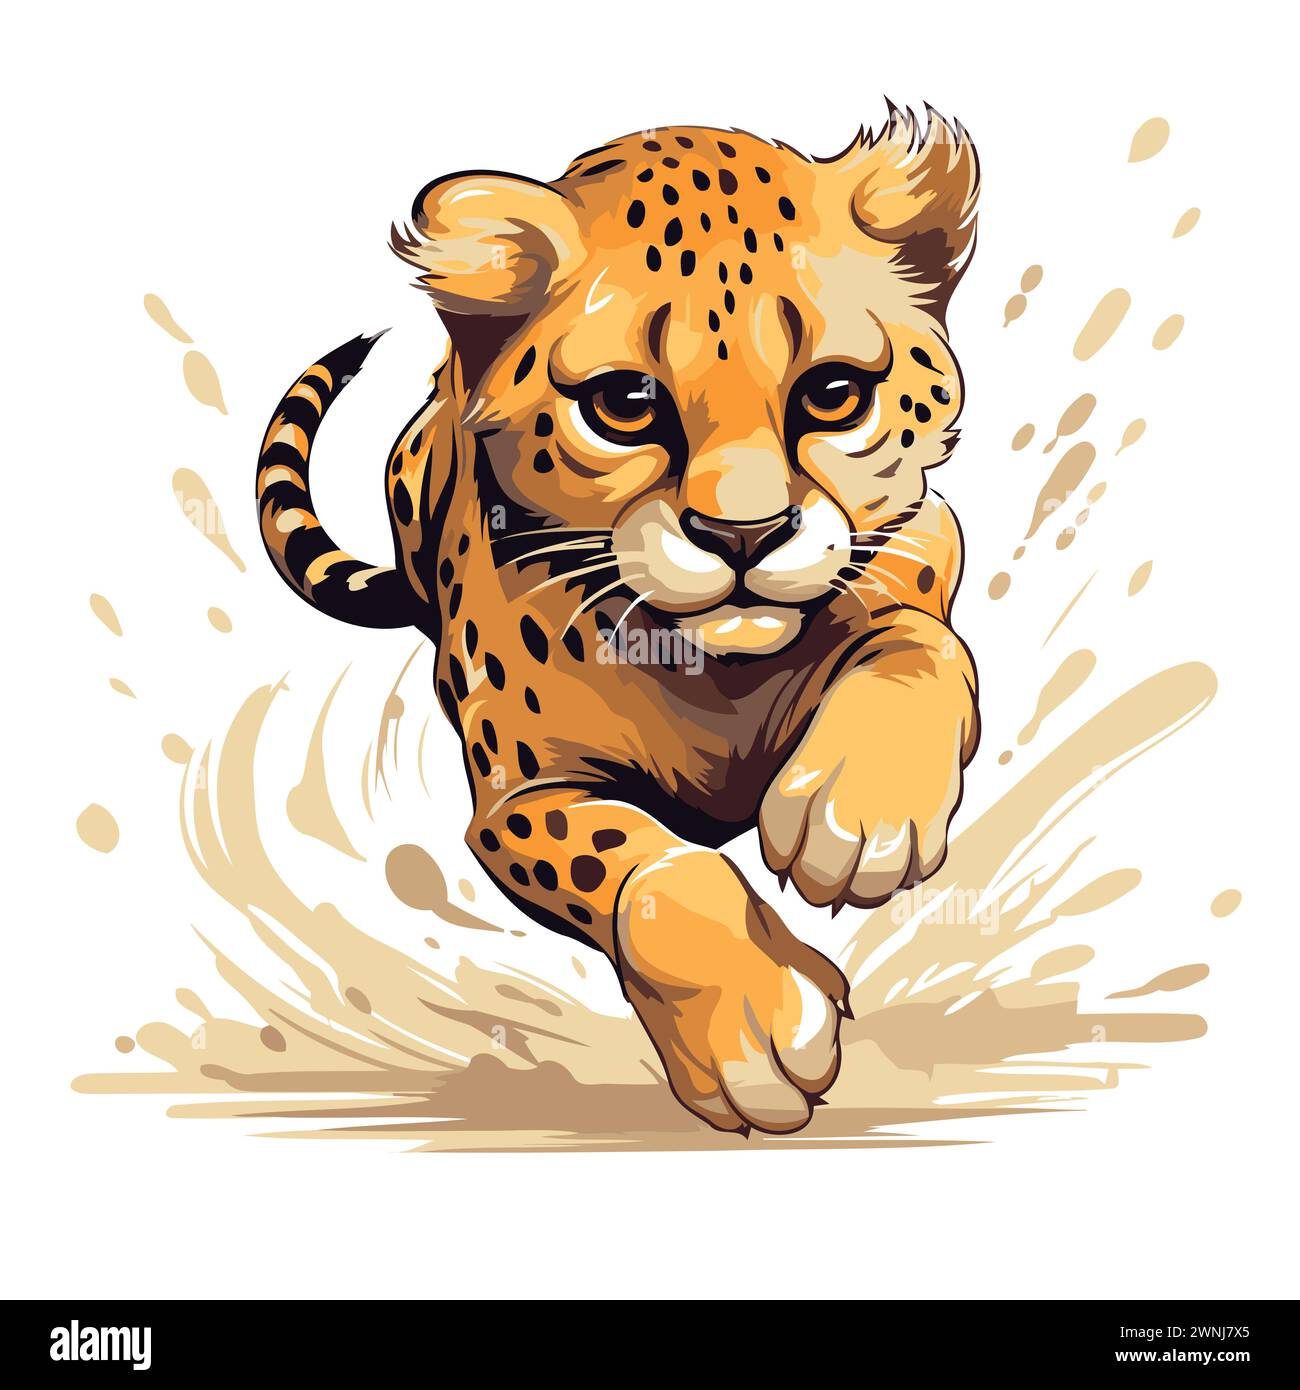 Cheetah running with splashes of ink. Vector illustration. Stock Vector